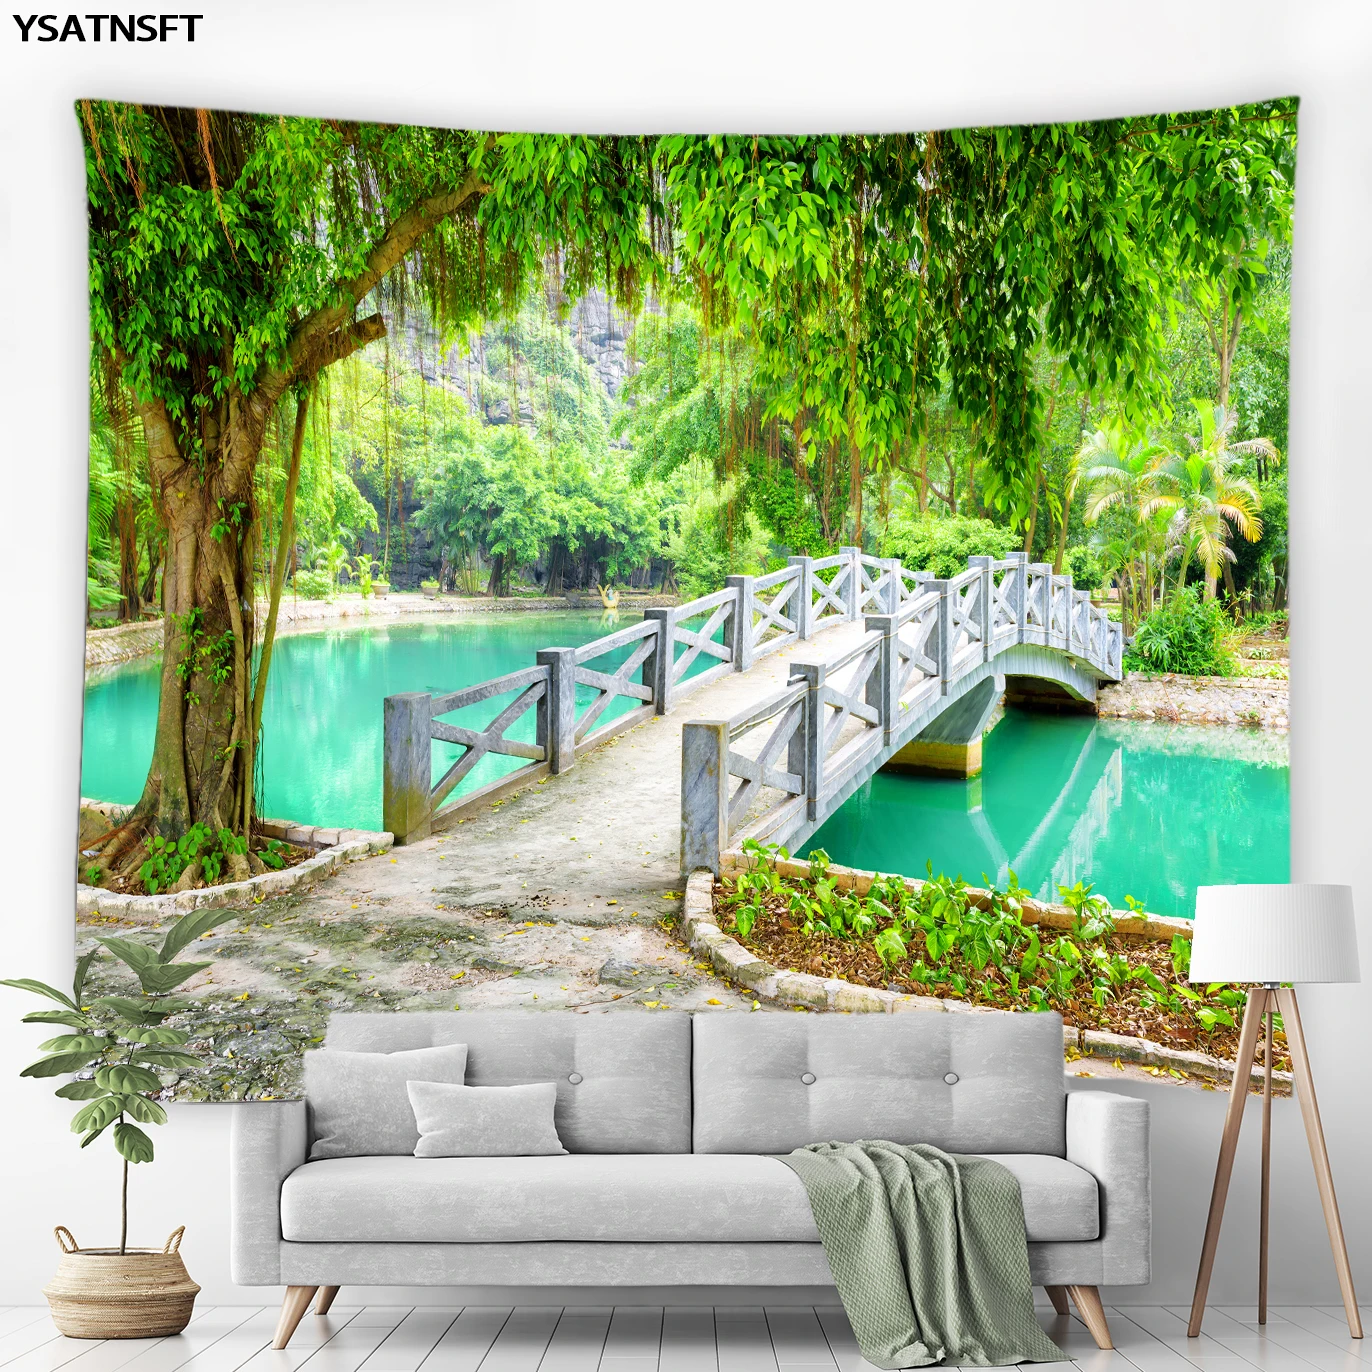 

3D Nature Landscape Tapestry Bridge Forest Tree Waterfall Mountain Lake Scenery Hippie Tapestry Bedroom Rugs Decor Wall Hanging